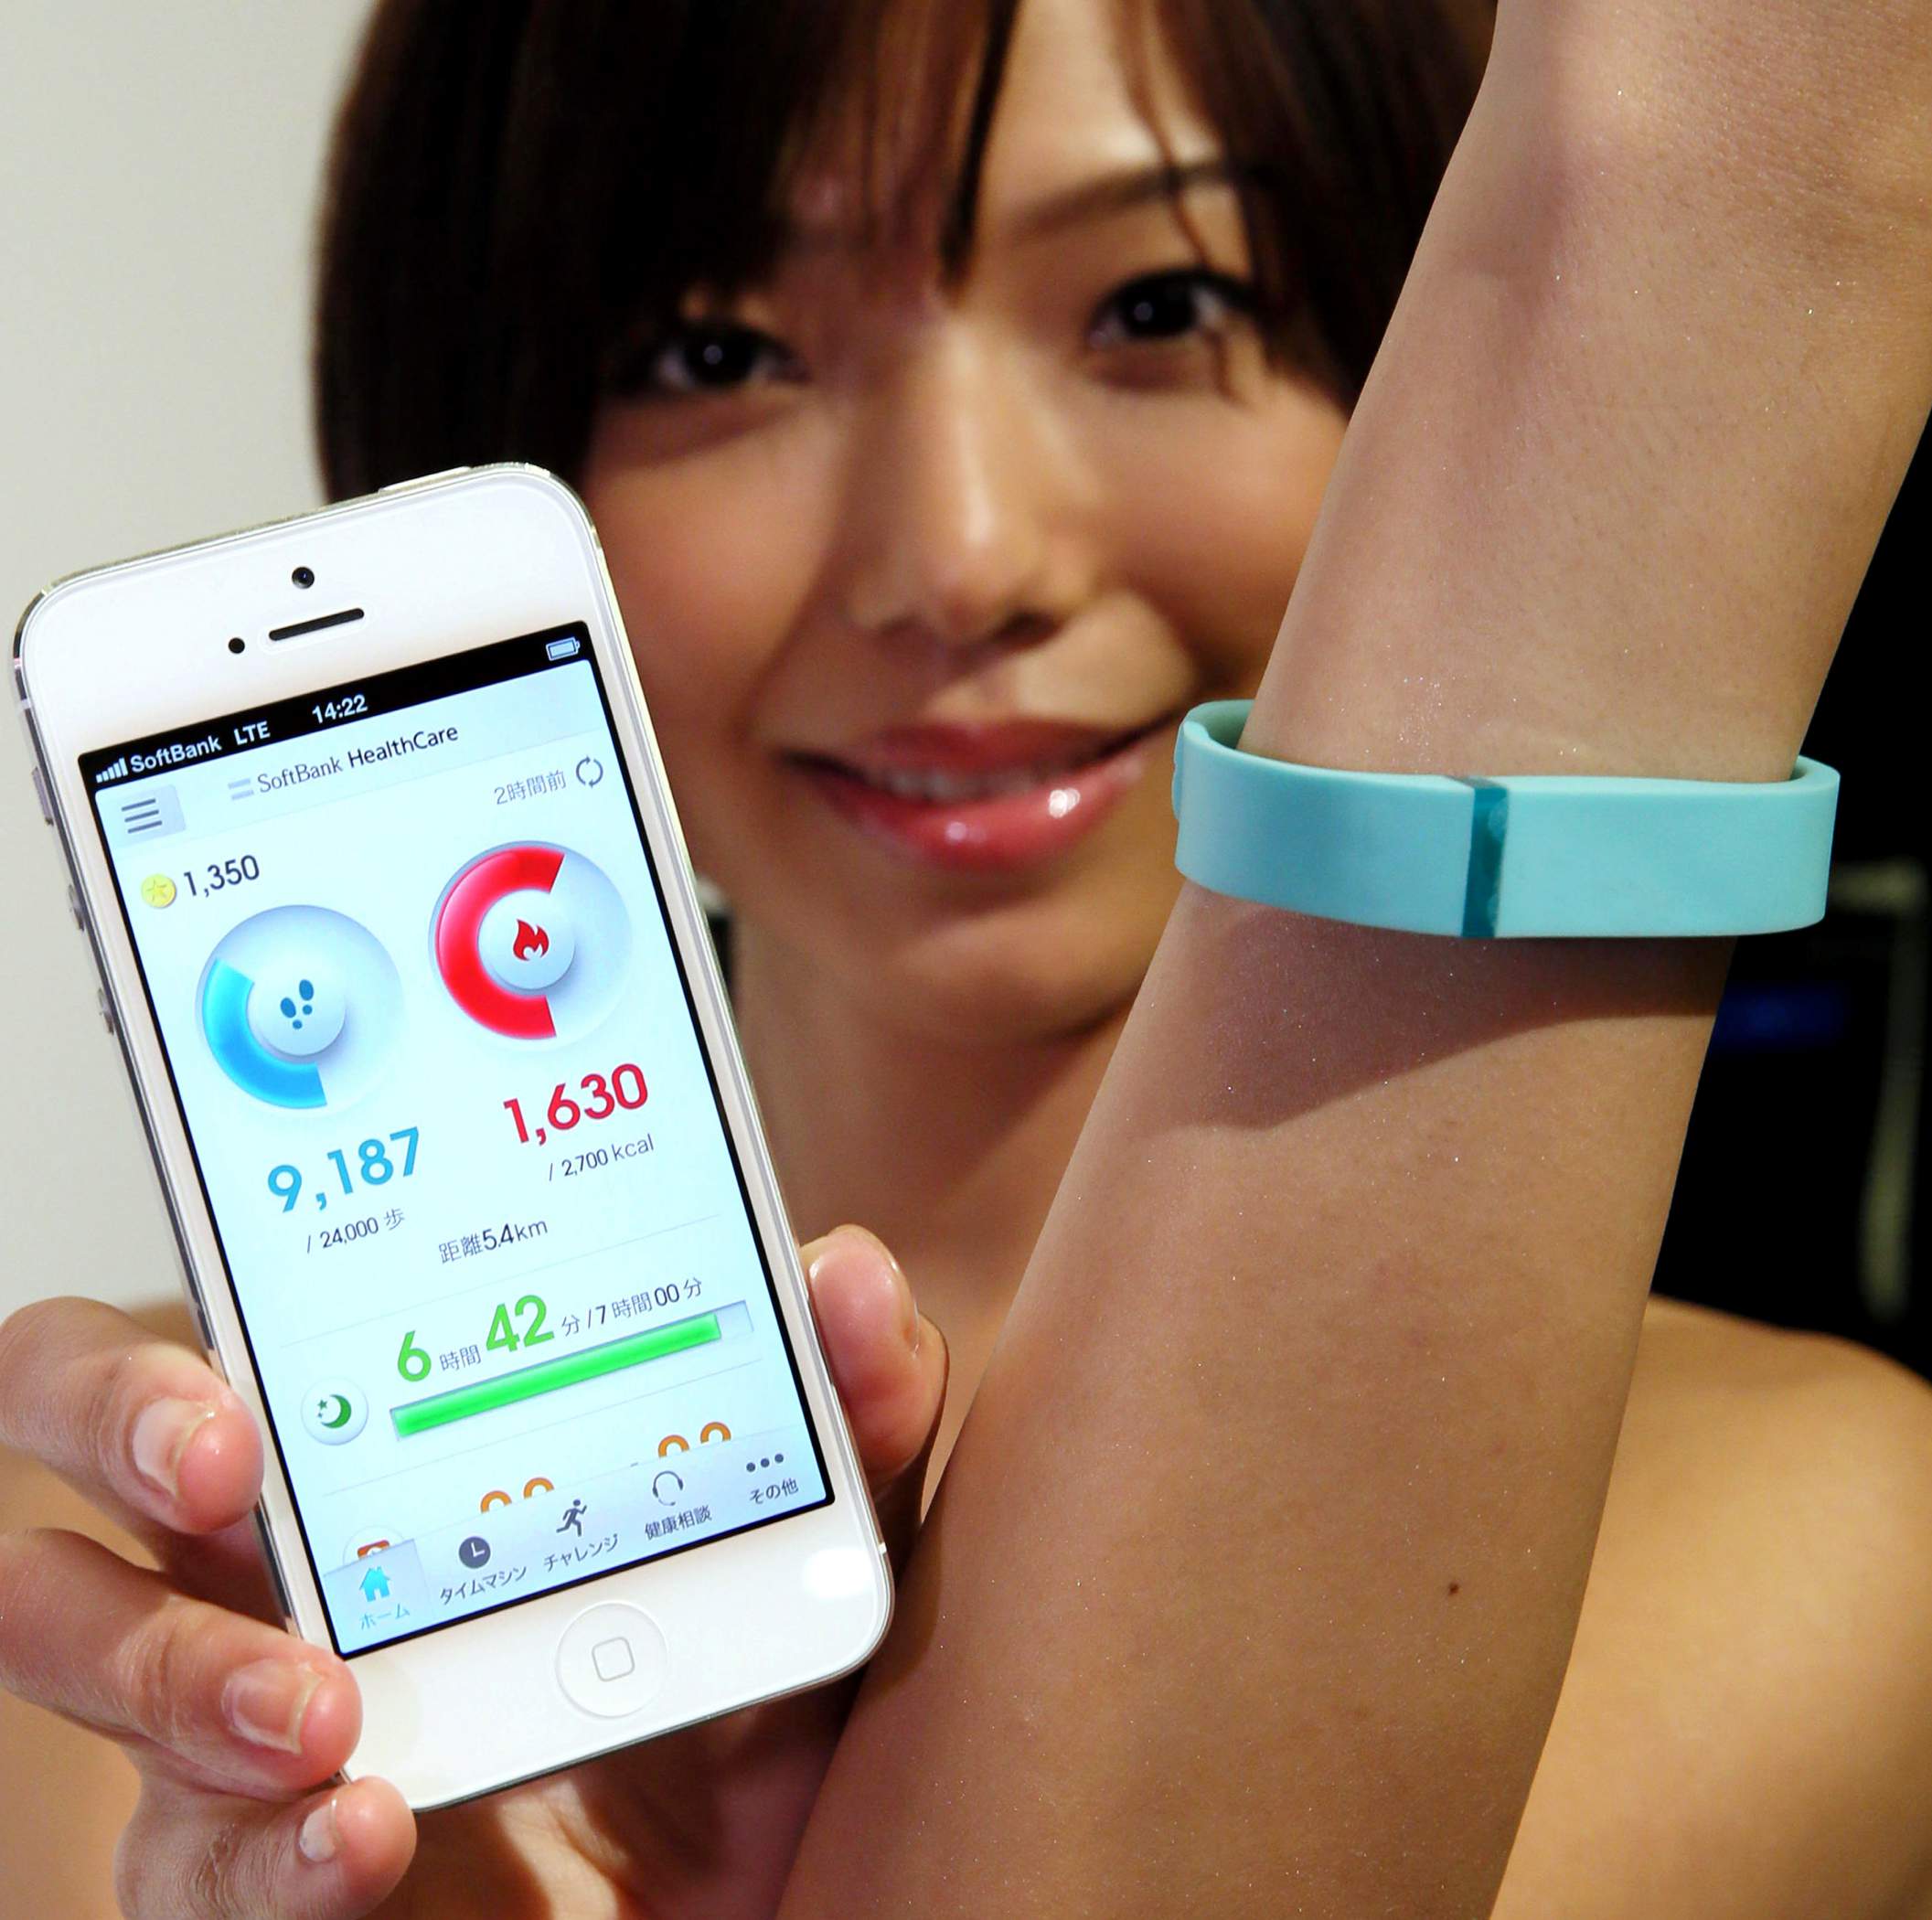 A young woman wears a wearable activity tracker and shows her smart phone tracking the fitness data from the tracker on her wrist.